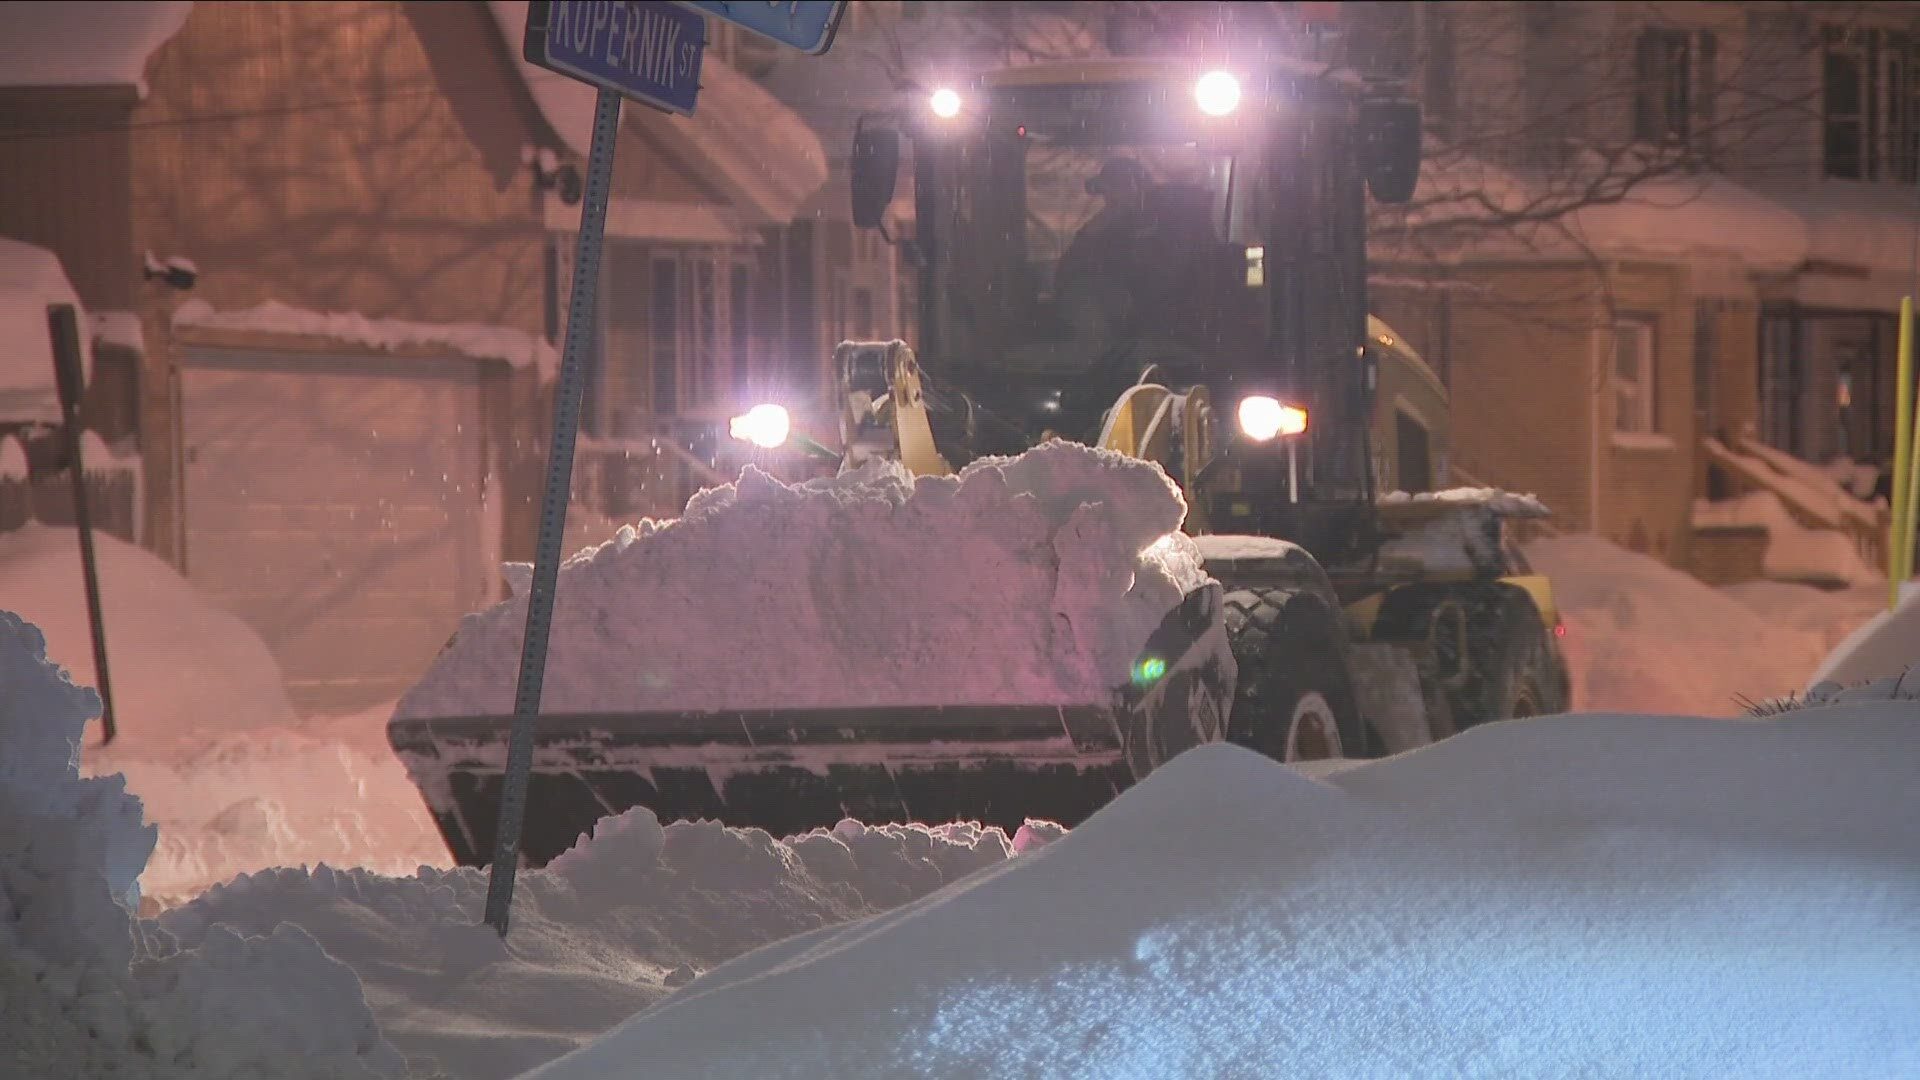 Crews work around the clock to clear city streets of snow